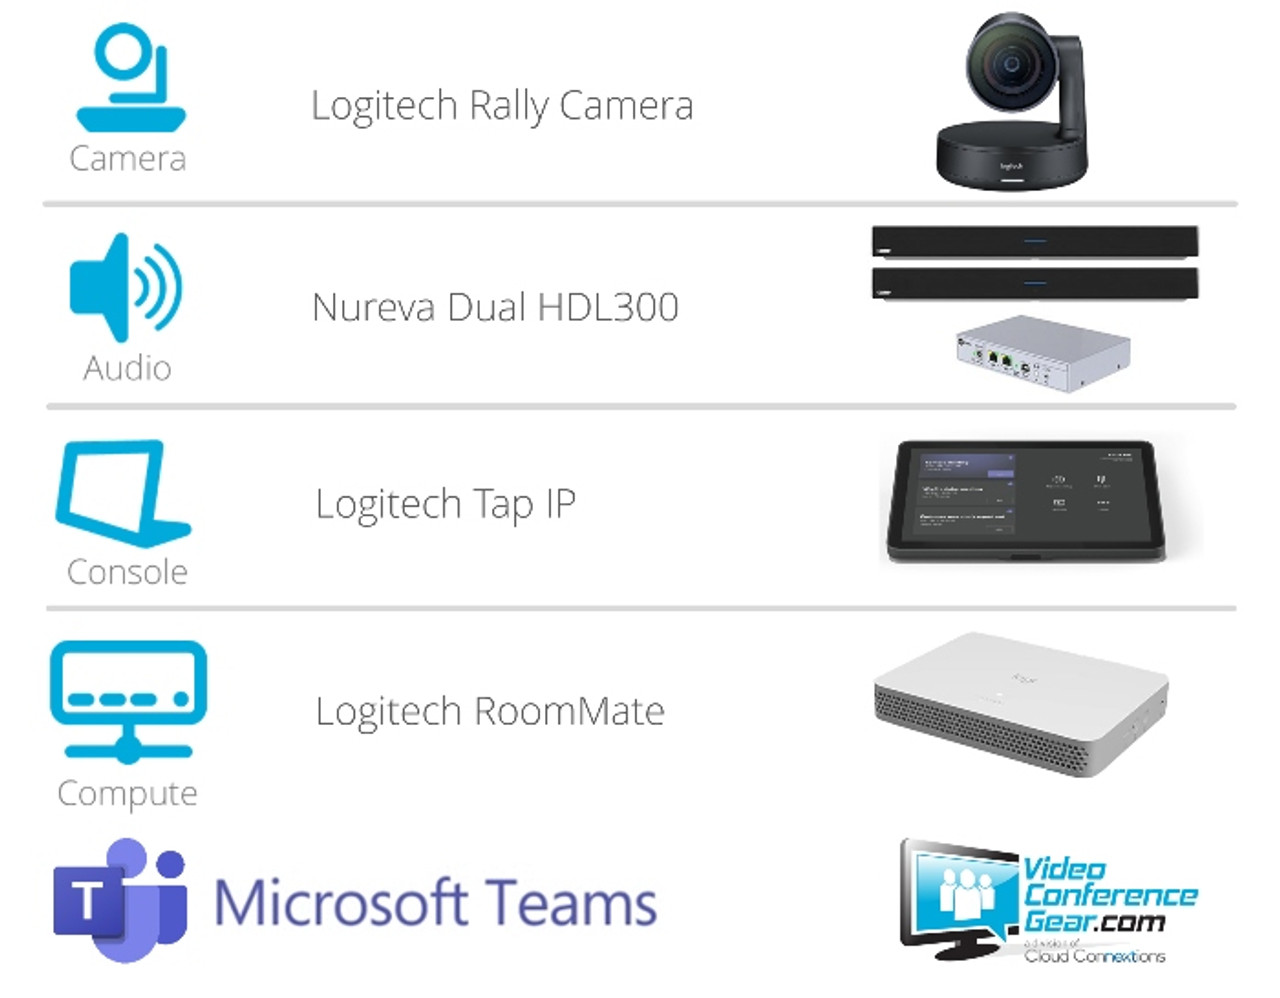 Microsoft Teams Rooms with Logitech Rally Camera, Roommate, Tap IP and Nureva Dual HDL300 for Large Rooms up 30'x50'